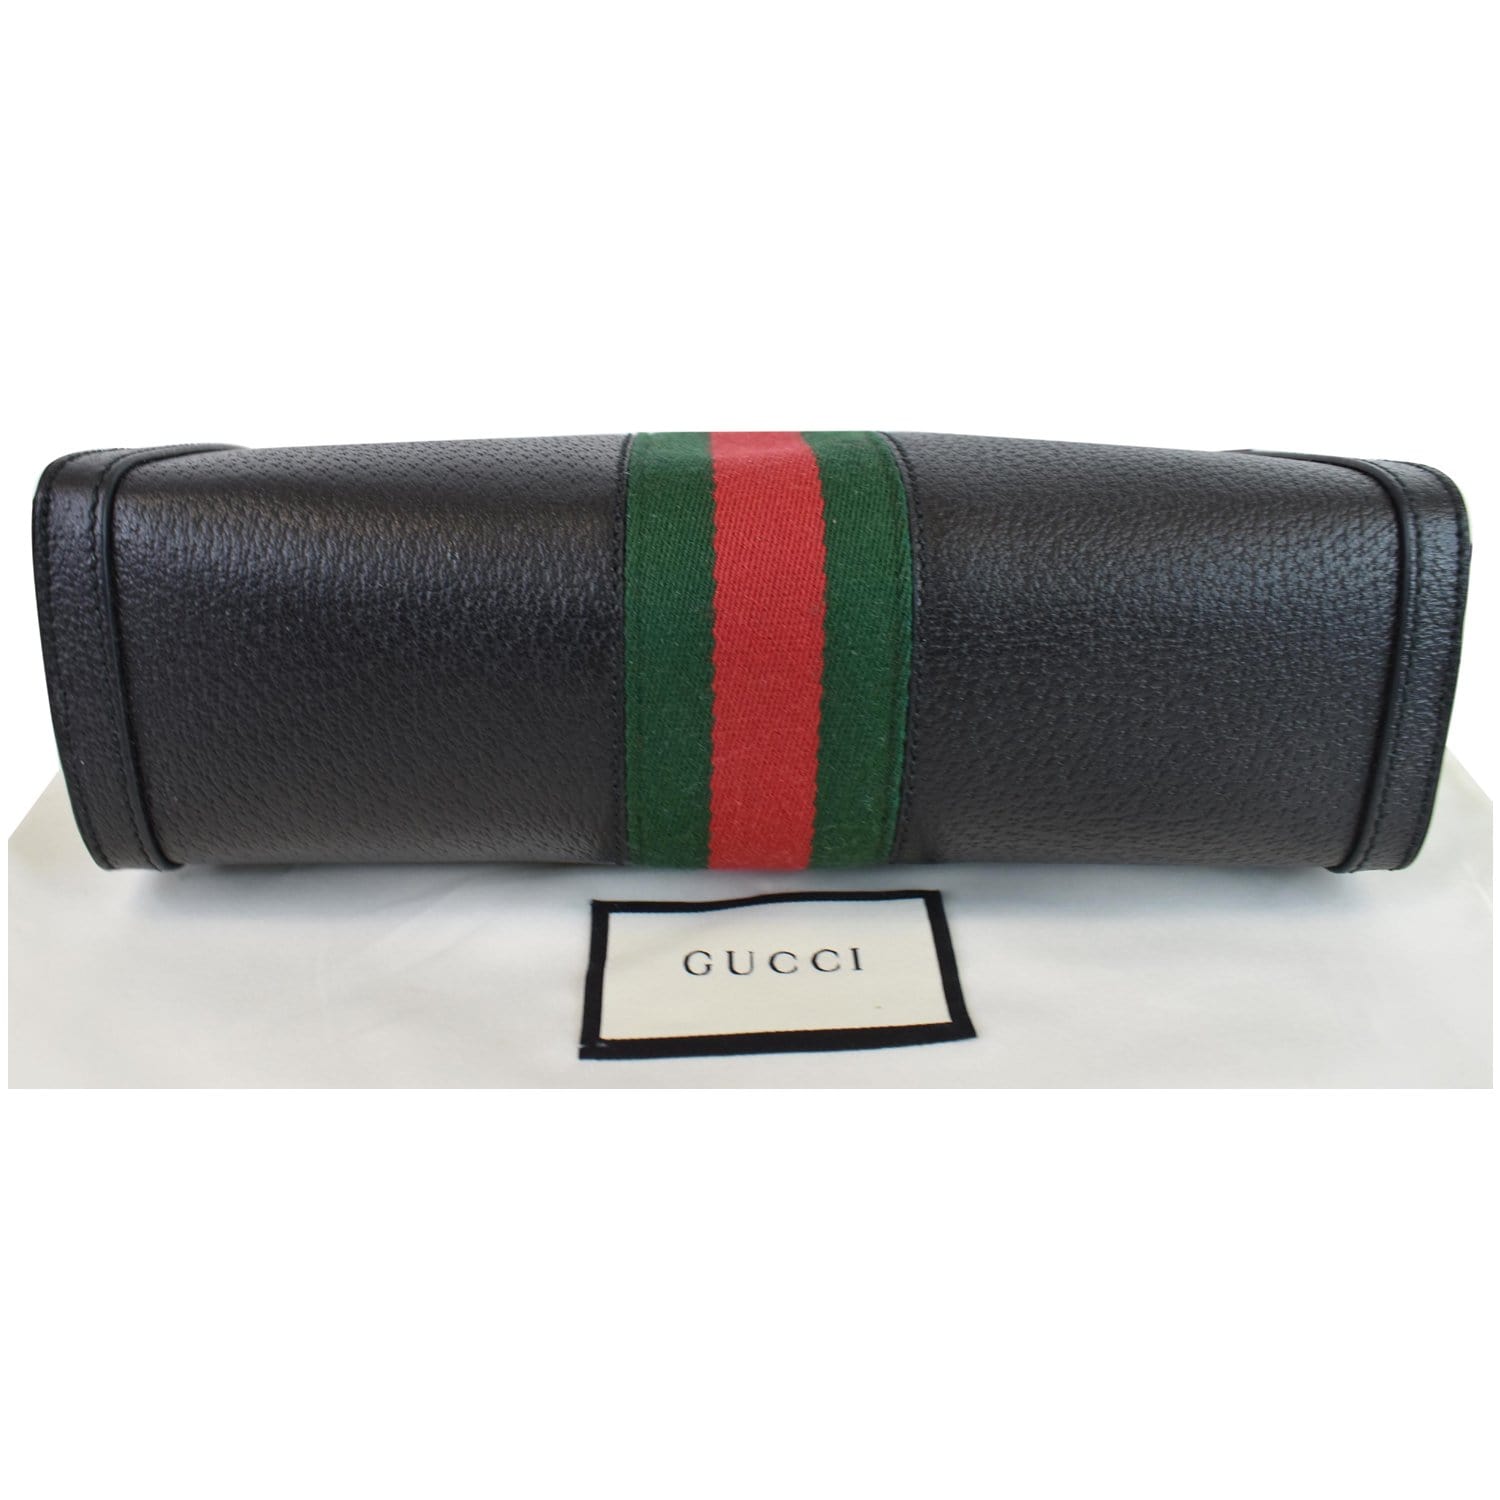 Gucci Ophidia Small Backpack Stripe - Black